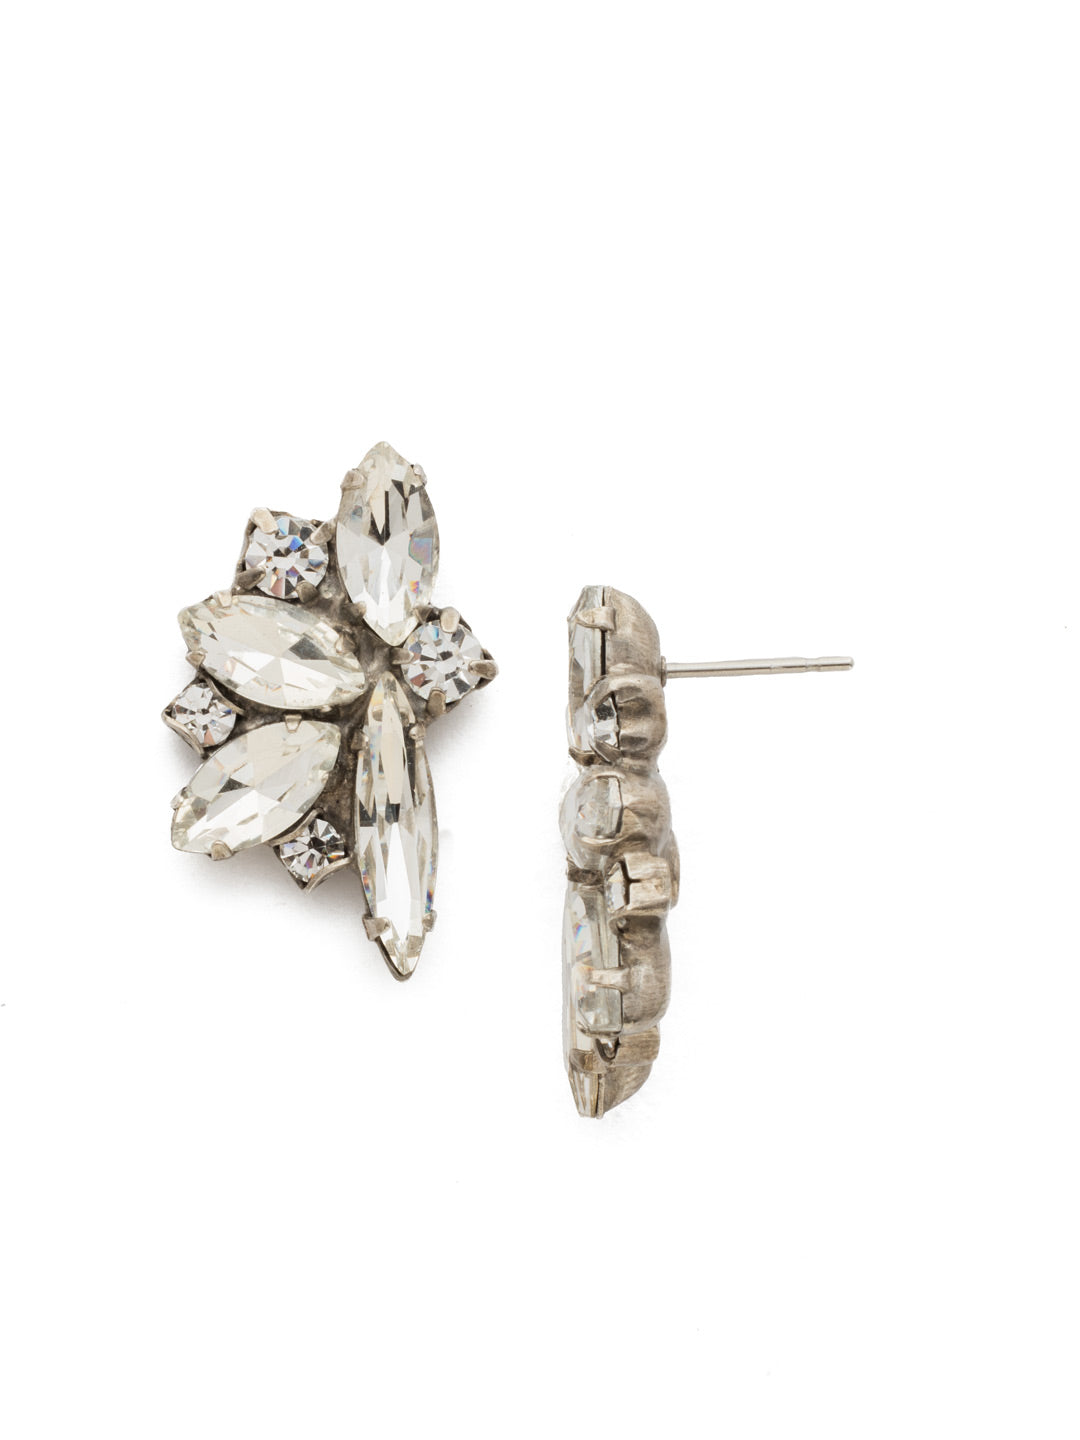 Fanned Vavette Stud Earrings - ECZ21ASCRY - <p>Looking sharp! This post earring features a series of pointed navette crystals fanned out from a central round crystal. From Sorrelli's Crystal collection in our Antique Silver-tone finish.</p>